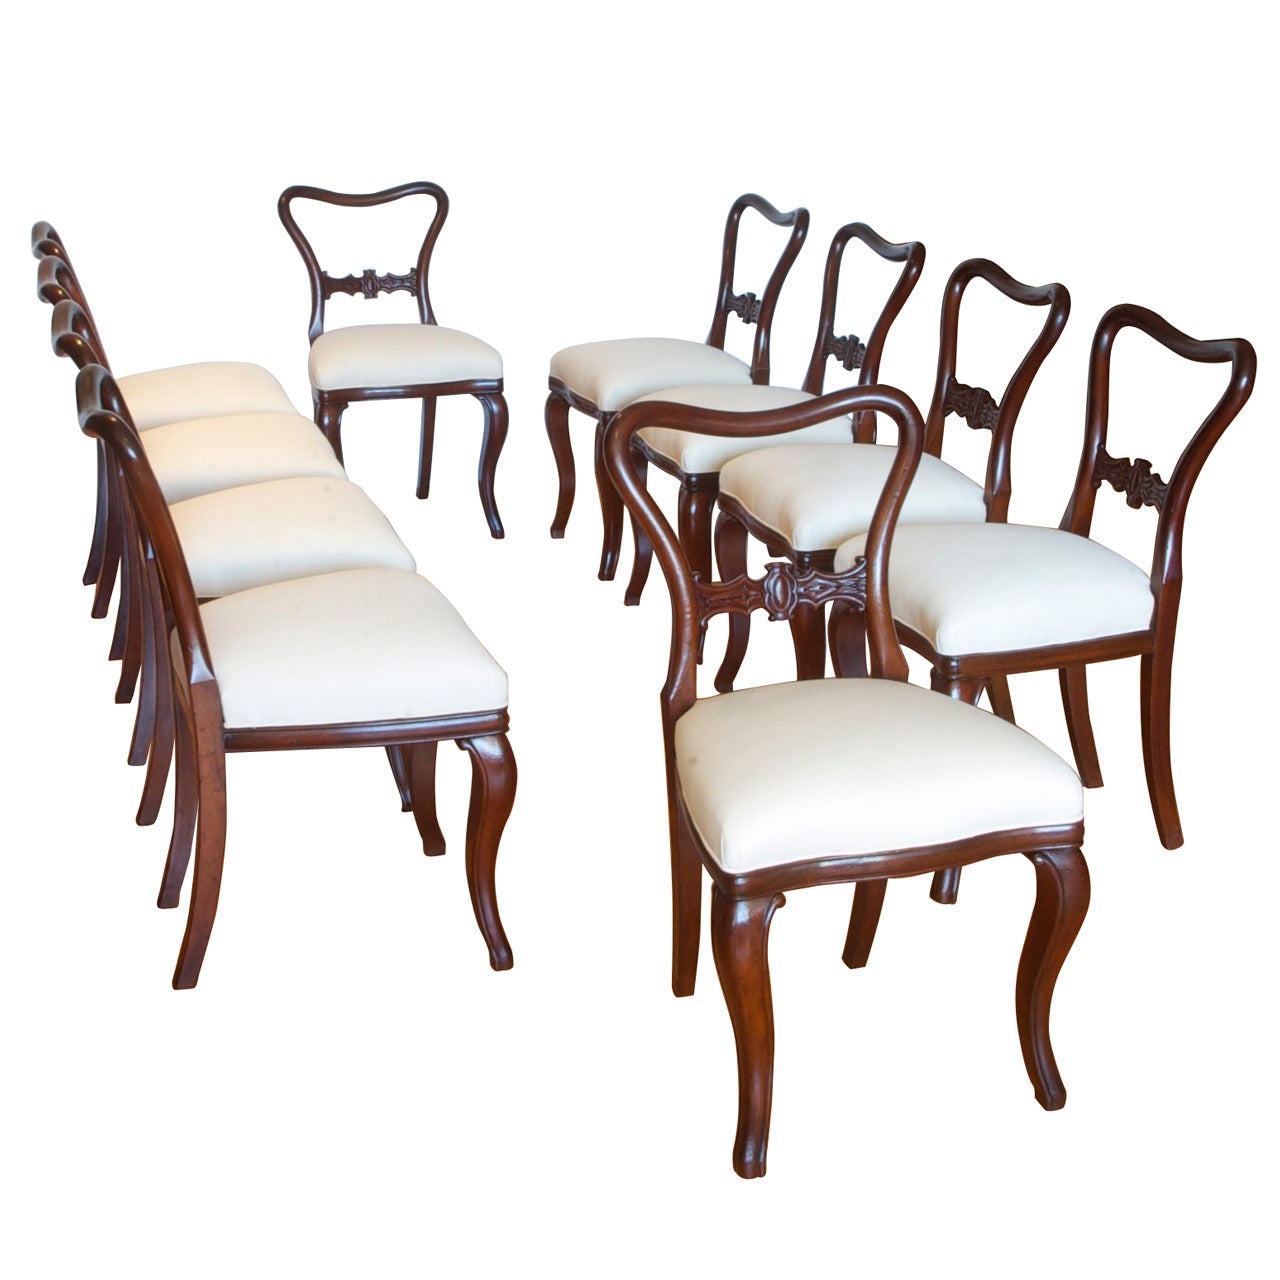 Set of Ten Antique Baltic Mahogany Dining Chairs with Upholstered Slip Seats